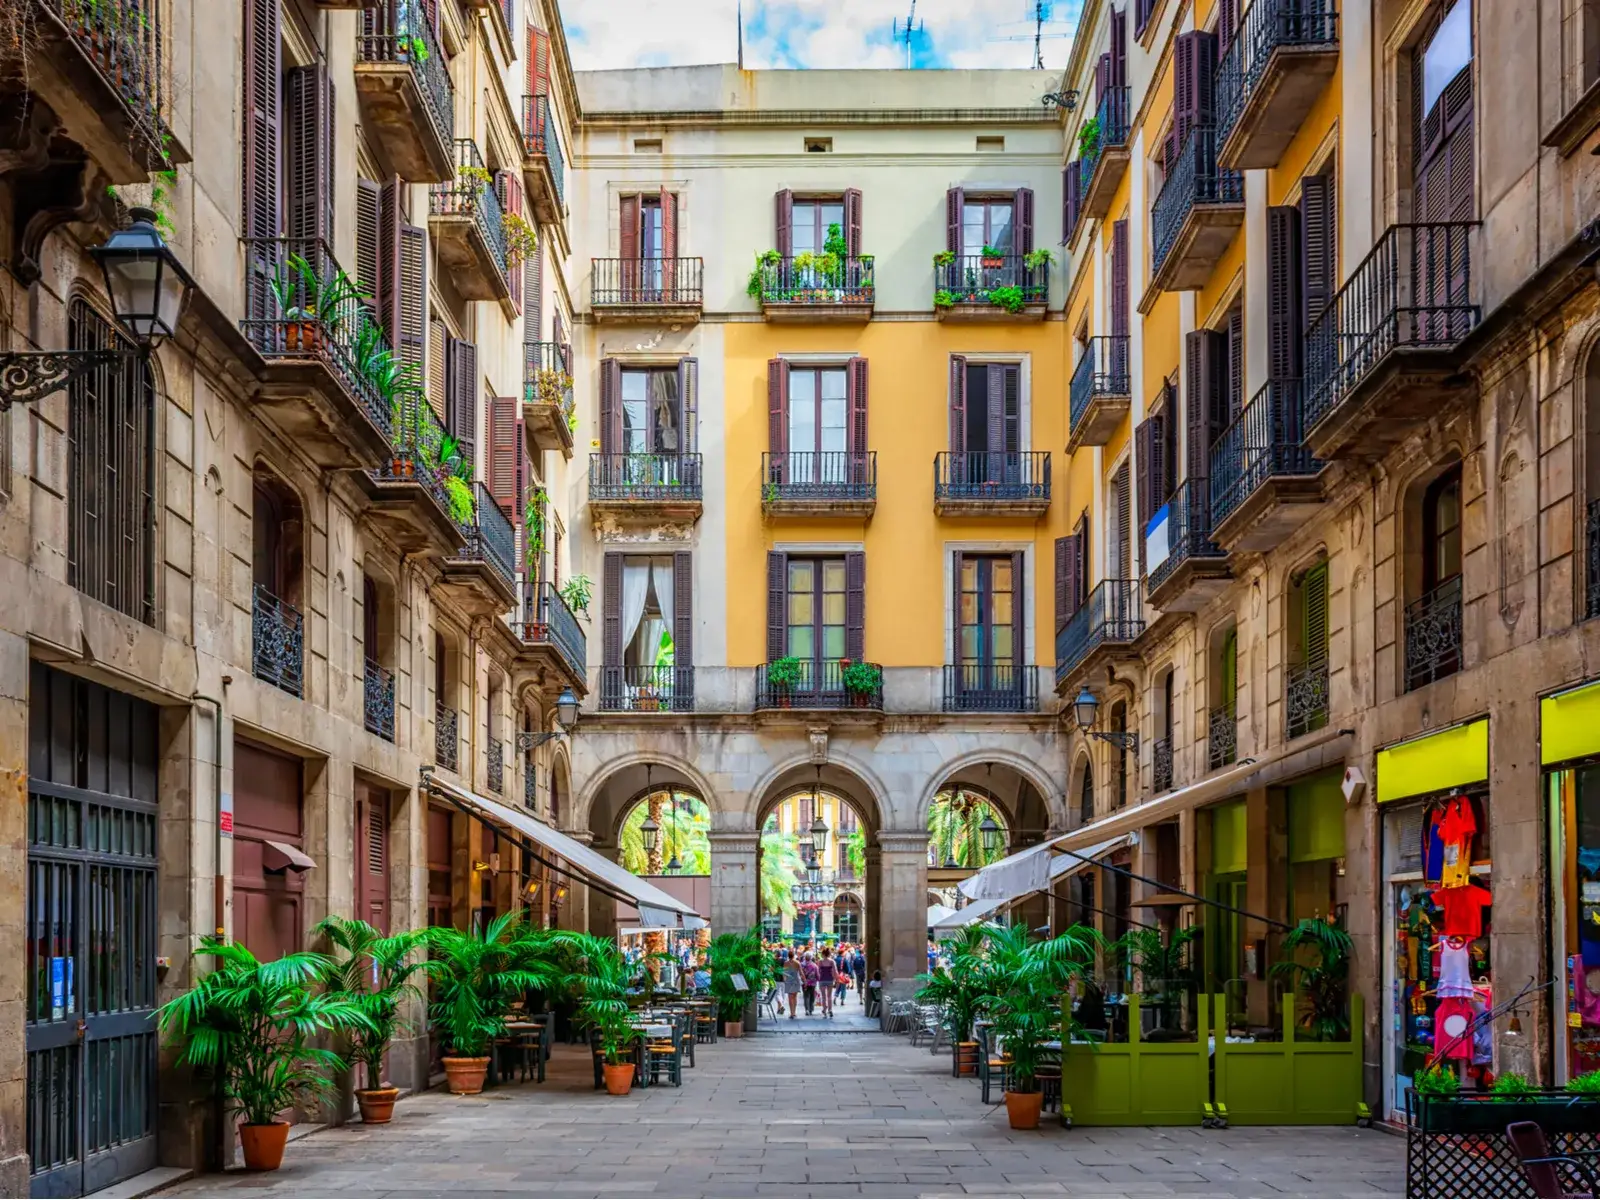 To illustrate the best time to visit Barcelona, a neat and narrow old street in Catalonia is pictured